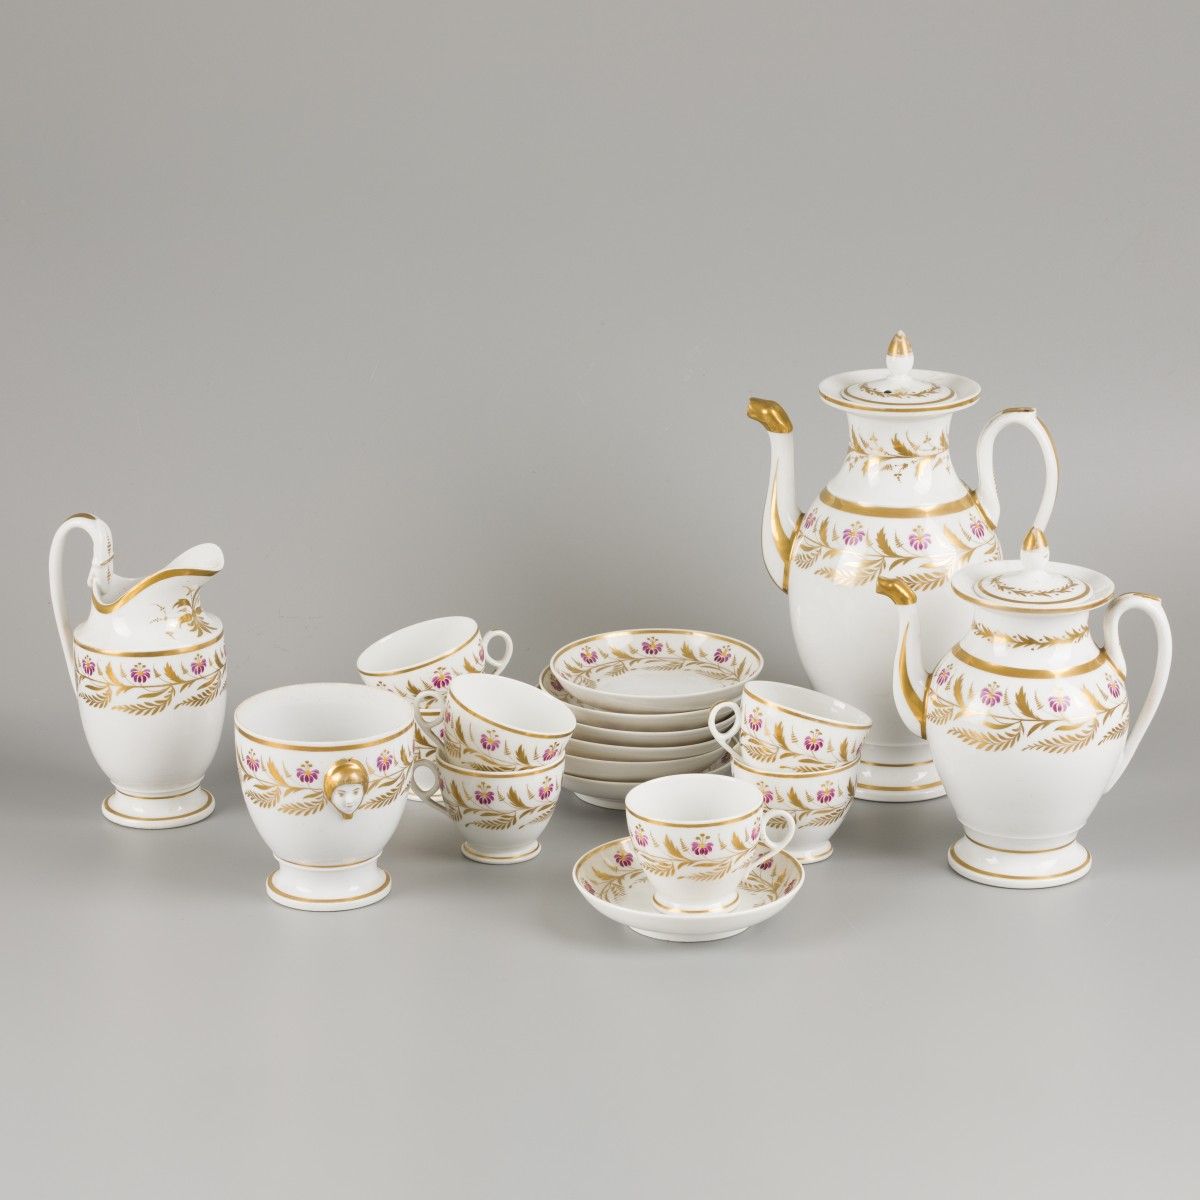 A porcelain coffee/tea set with floral decorations, France, early 19th century. &hellip;